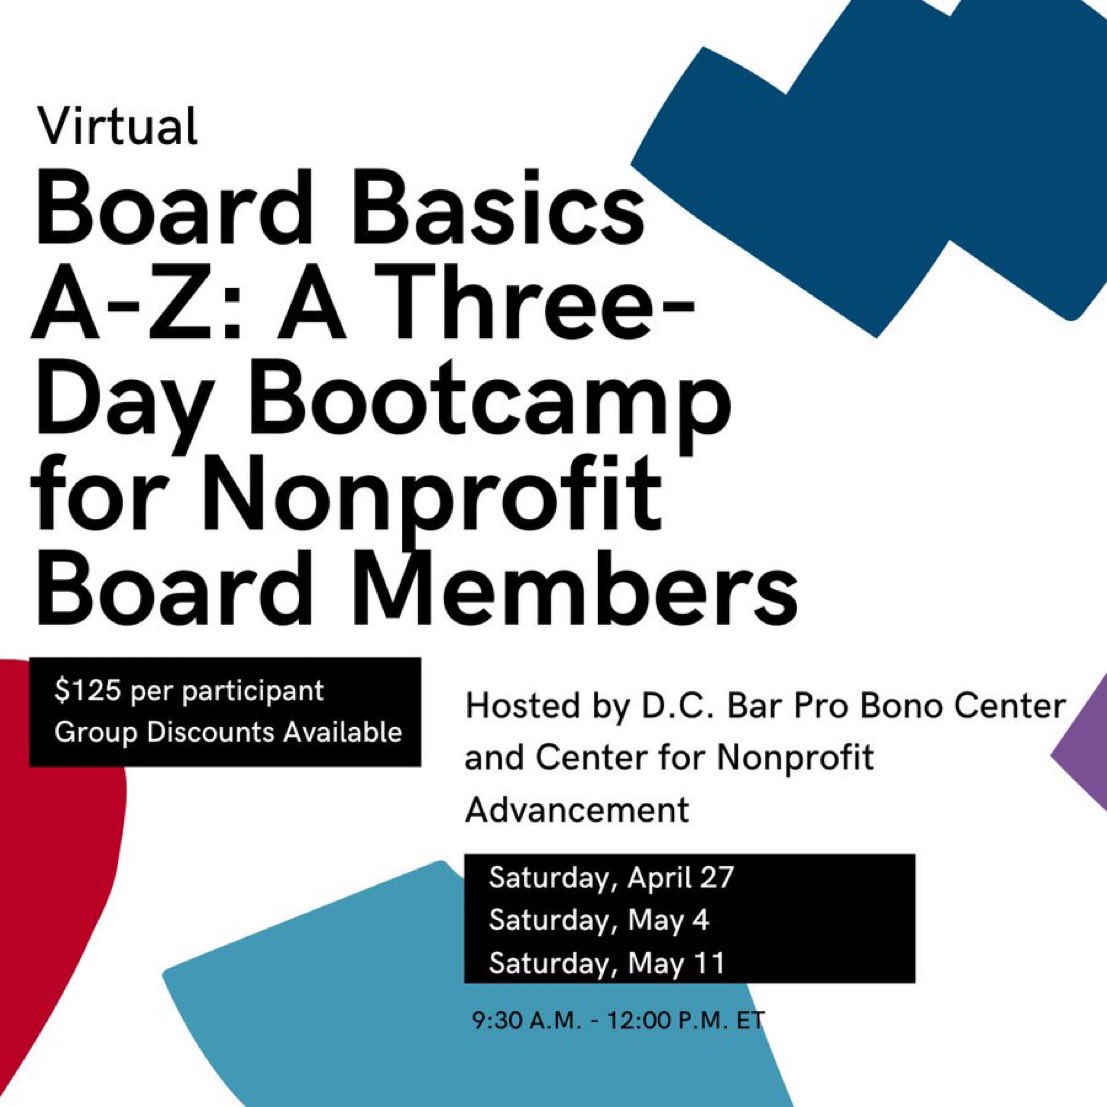 On April 27, join @centernonprof and @DCBarProBono for our three-part bootcamp. The course is designed for experienced, new, and aspiring board members. Discounts available for groups of 2 or more! Register: bit.ly/3QhM2rI #Centernonprof #BoardBasics #DCNonprofit